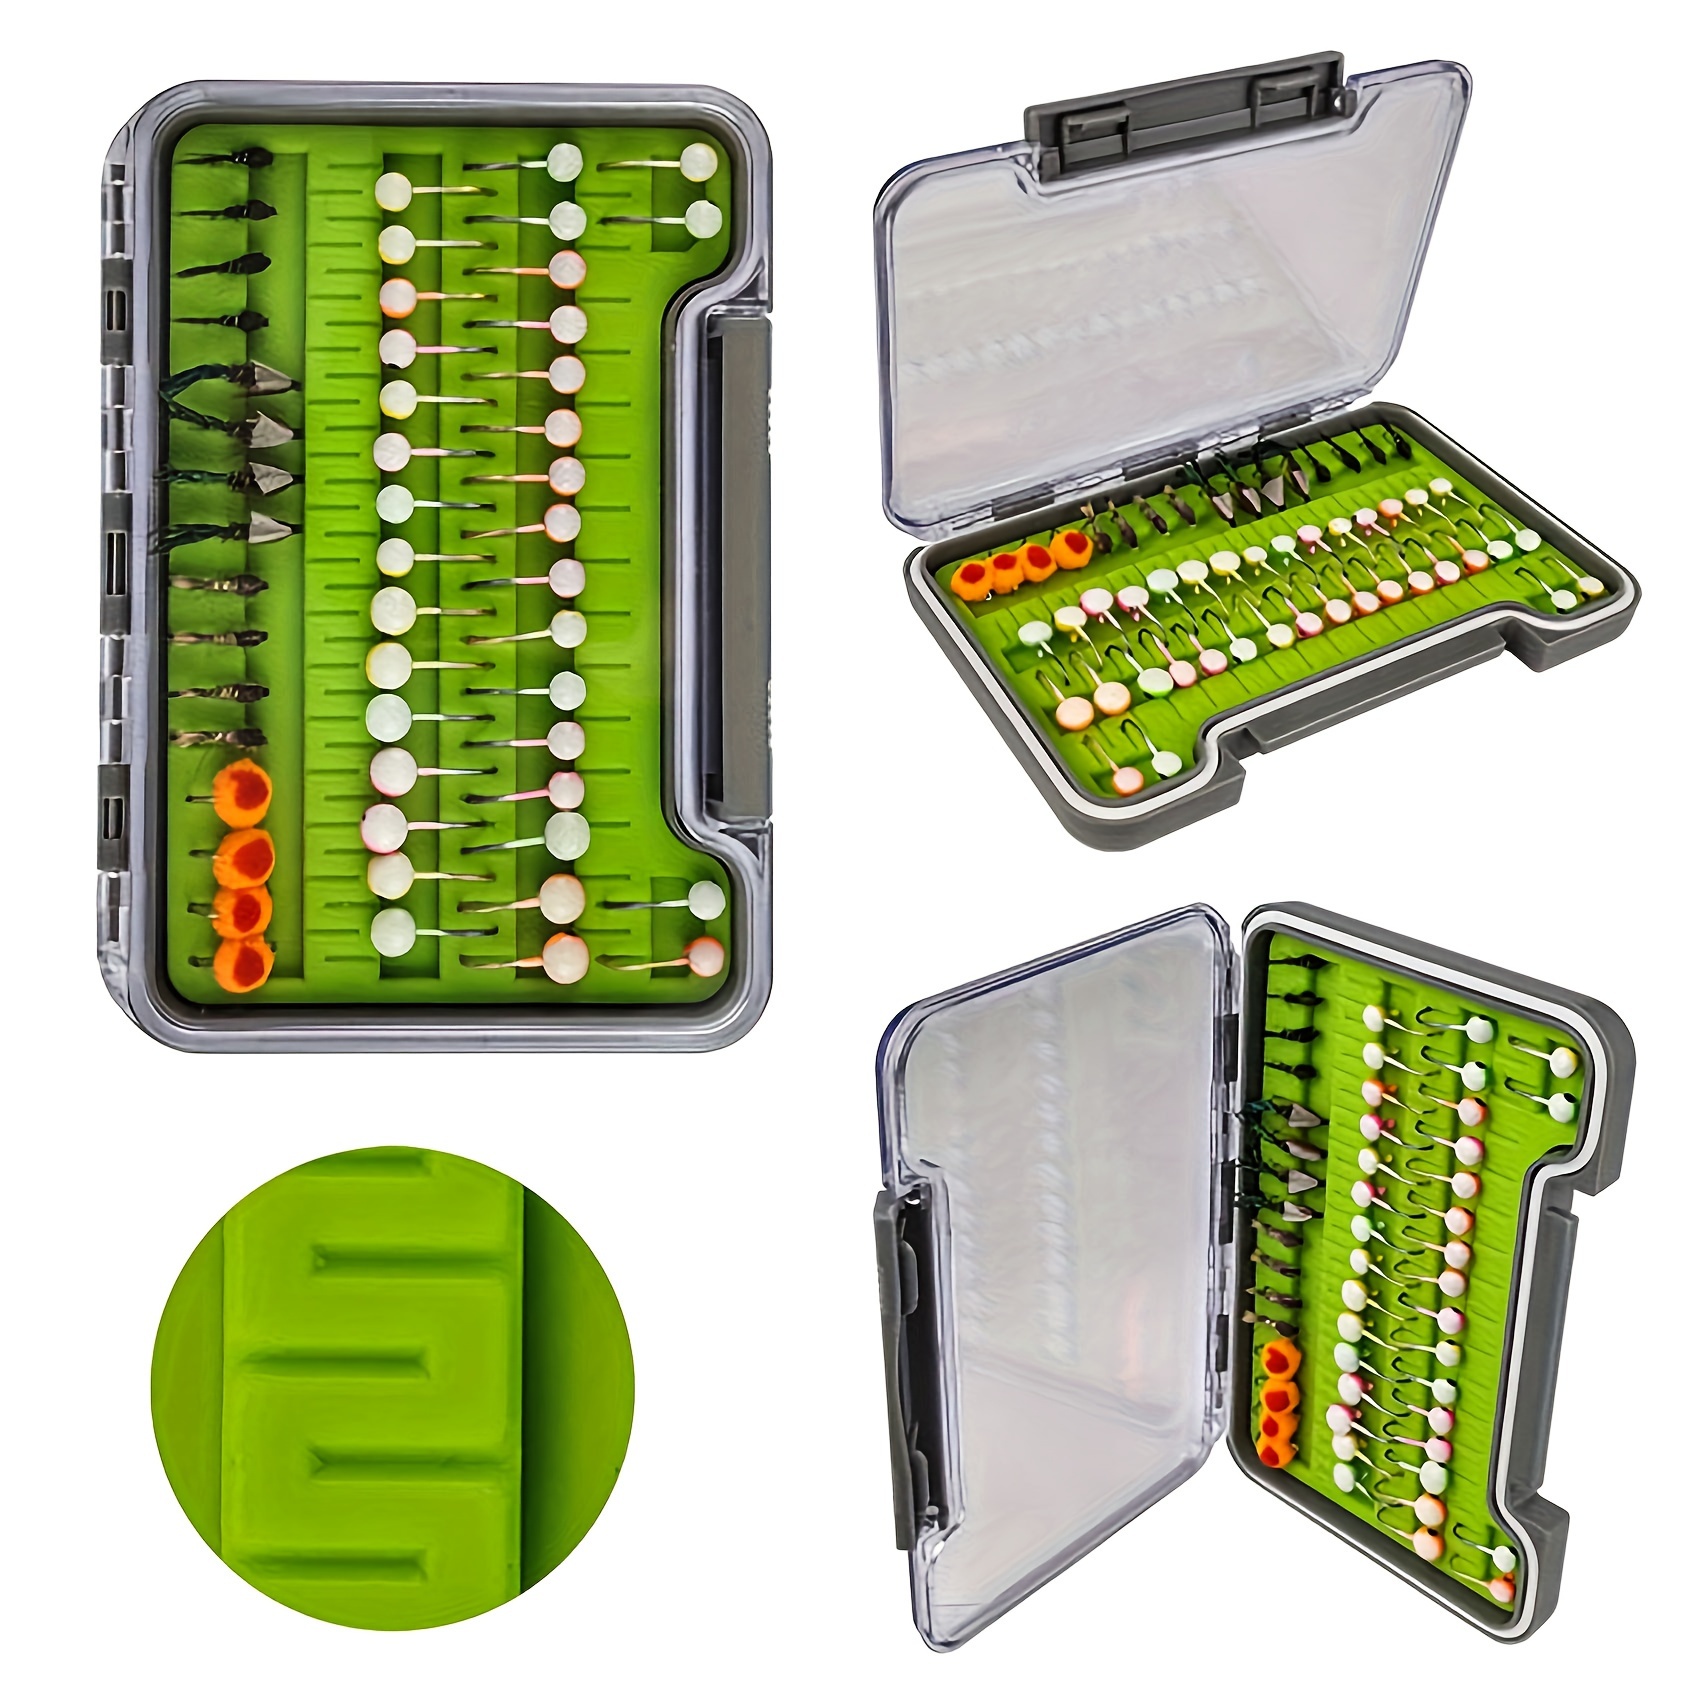  Aventik Two-Sided Silicone Fishing Tackle Boxes Waterproof  Tackle Storage with Foam Swing Leaf Box(G088) : Sports & Outdoors